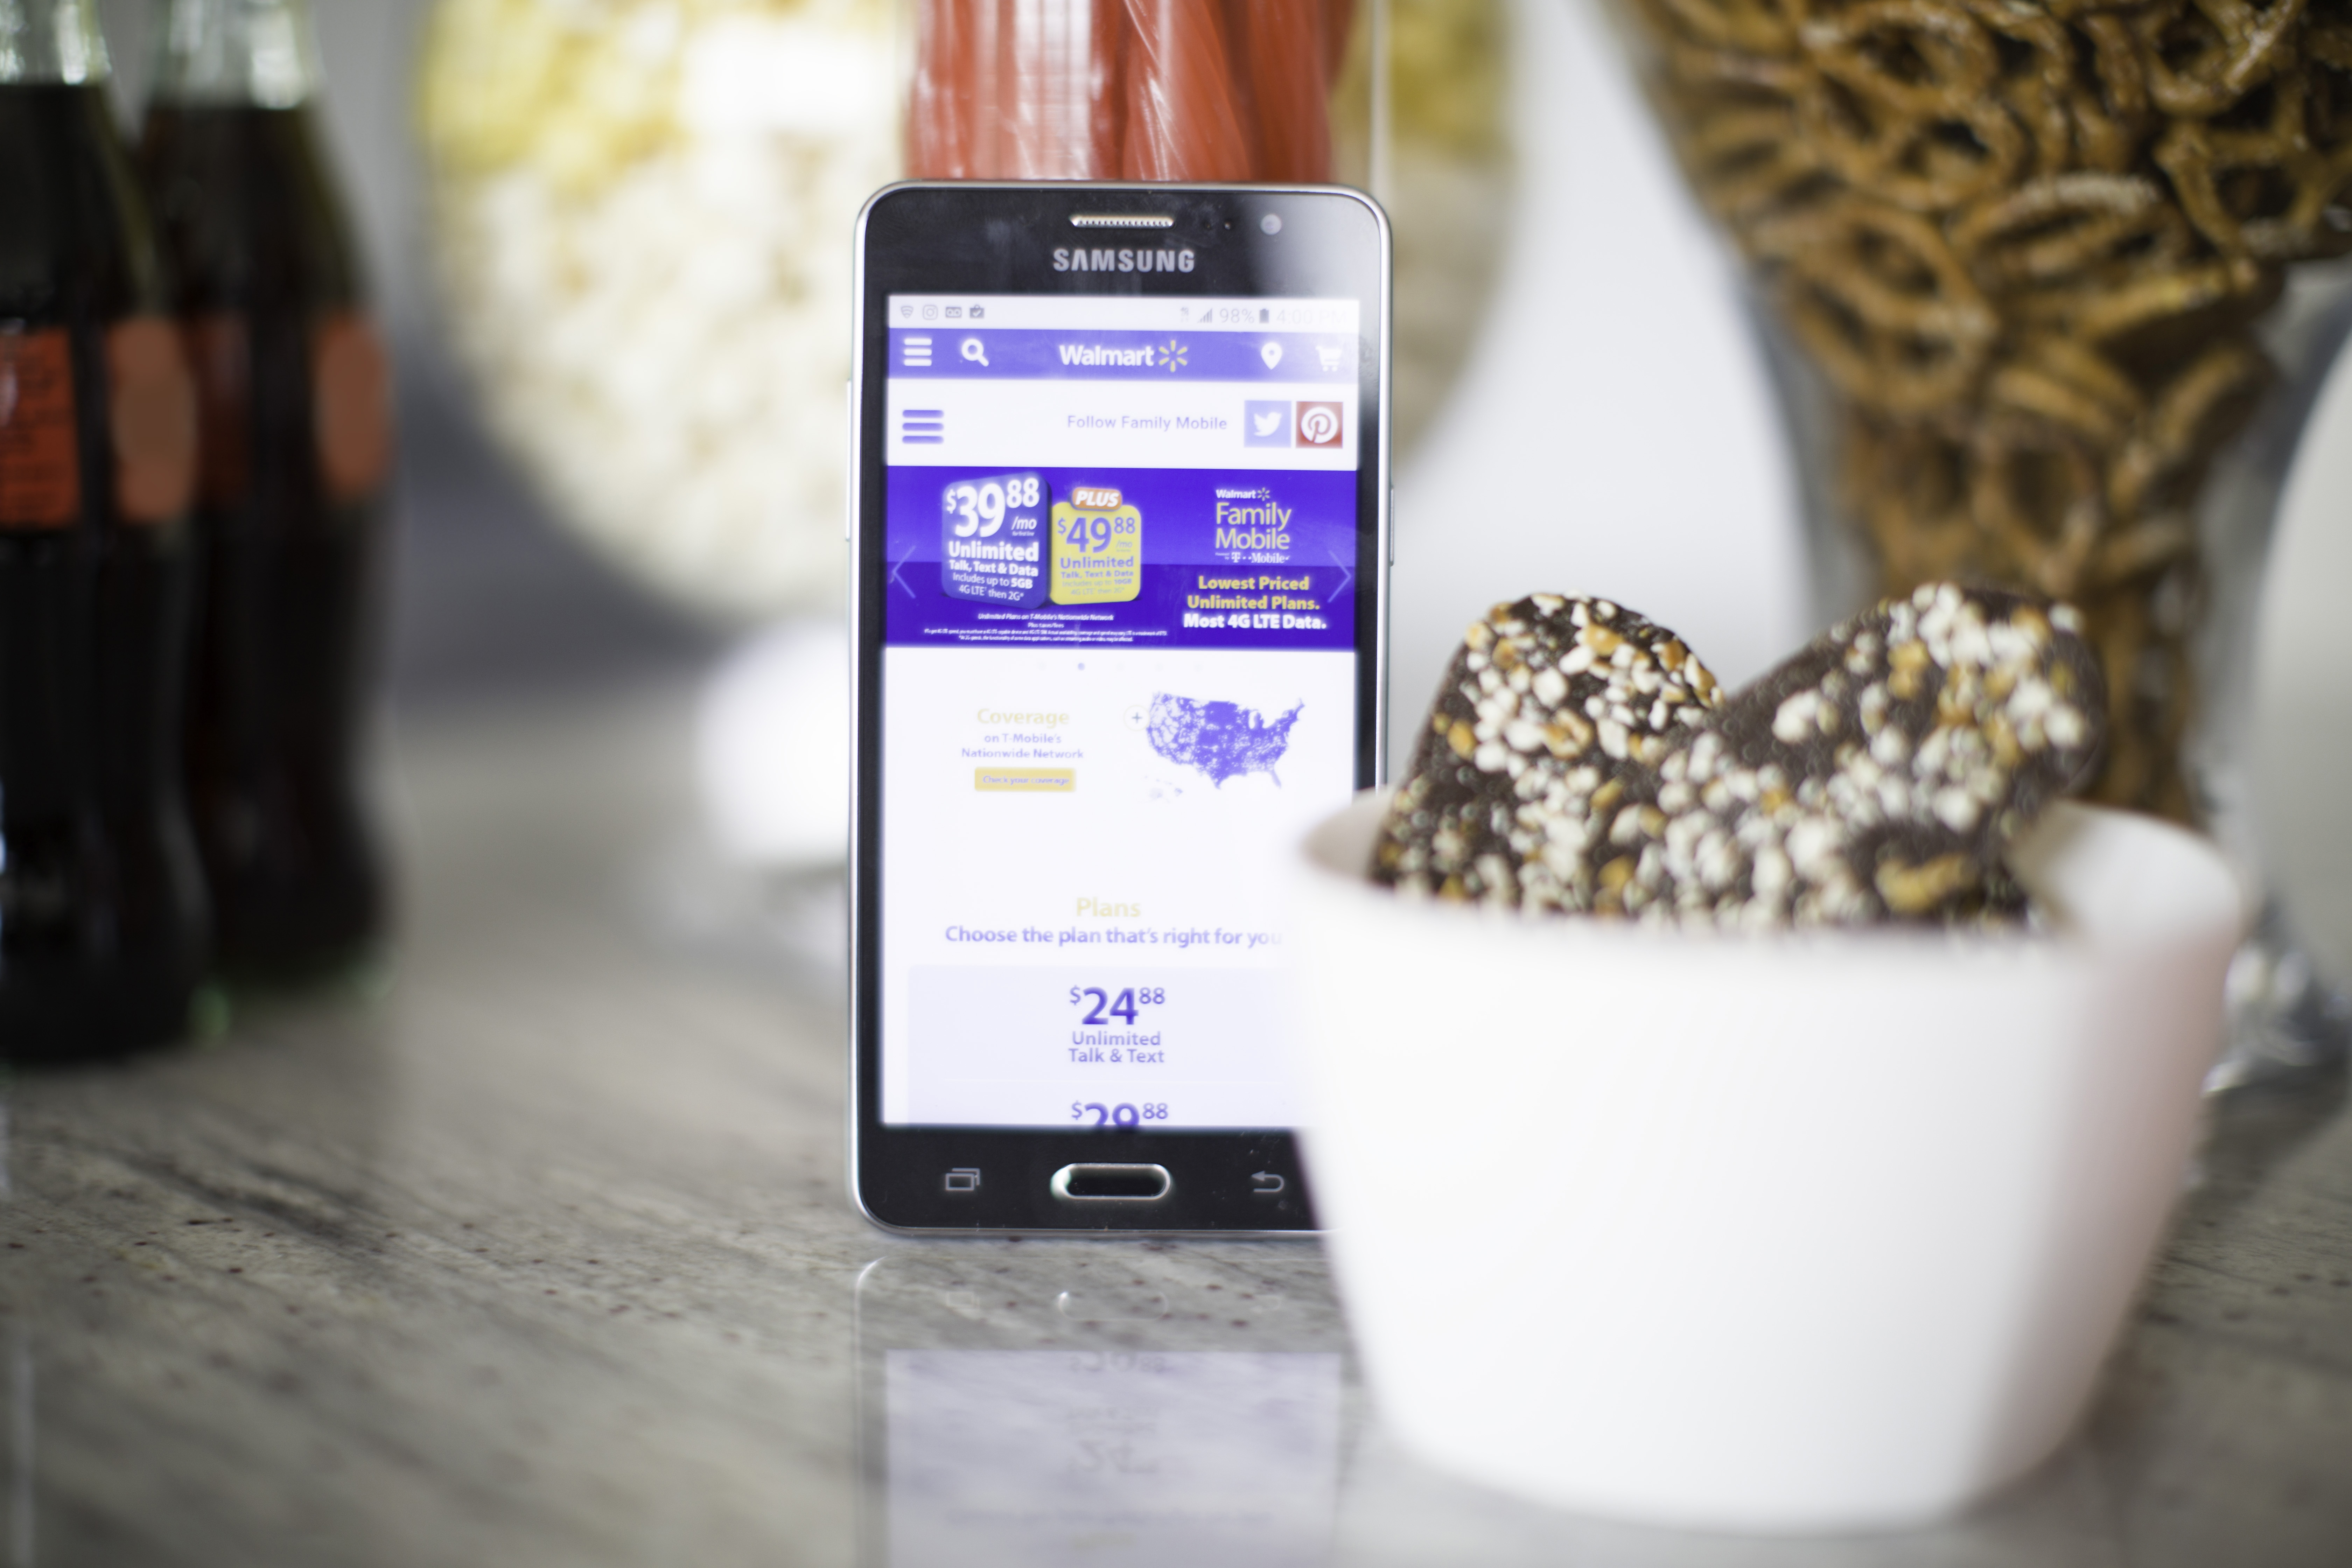 Movie night with Walmart Family Mobile, Max Your Tax Cash with Walmart Family Mobile Plus, Samsung Galaxy On5 #shop #YourTaxCash #CampaignHashtag #CollectiveBias #ad